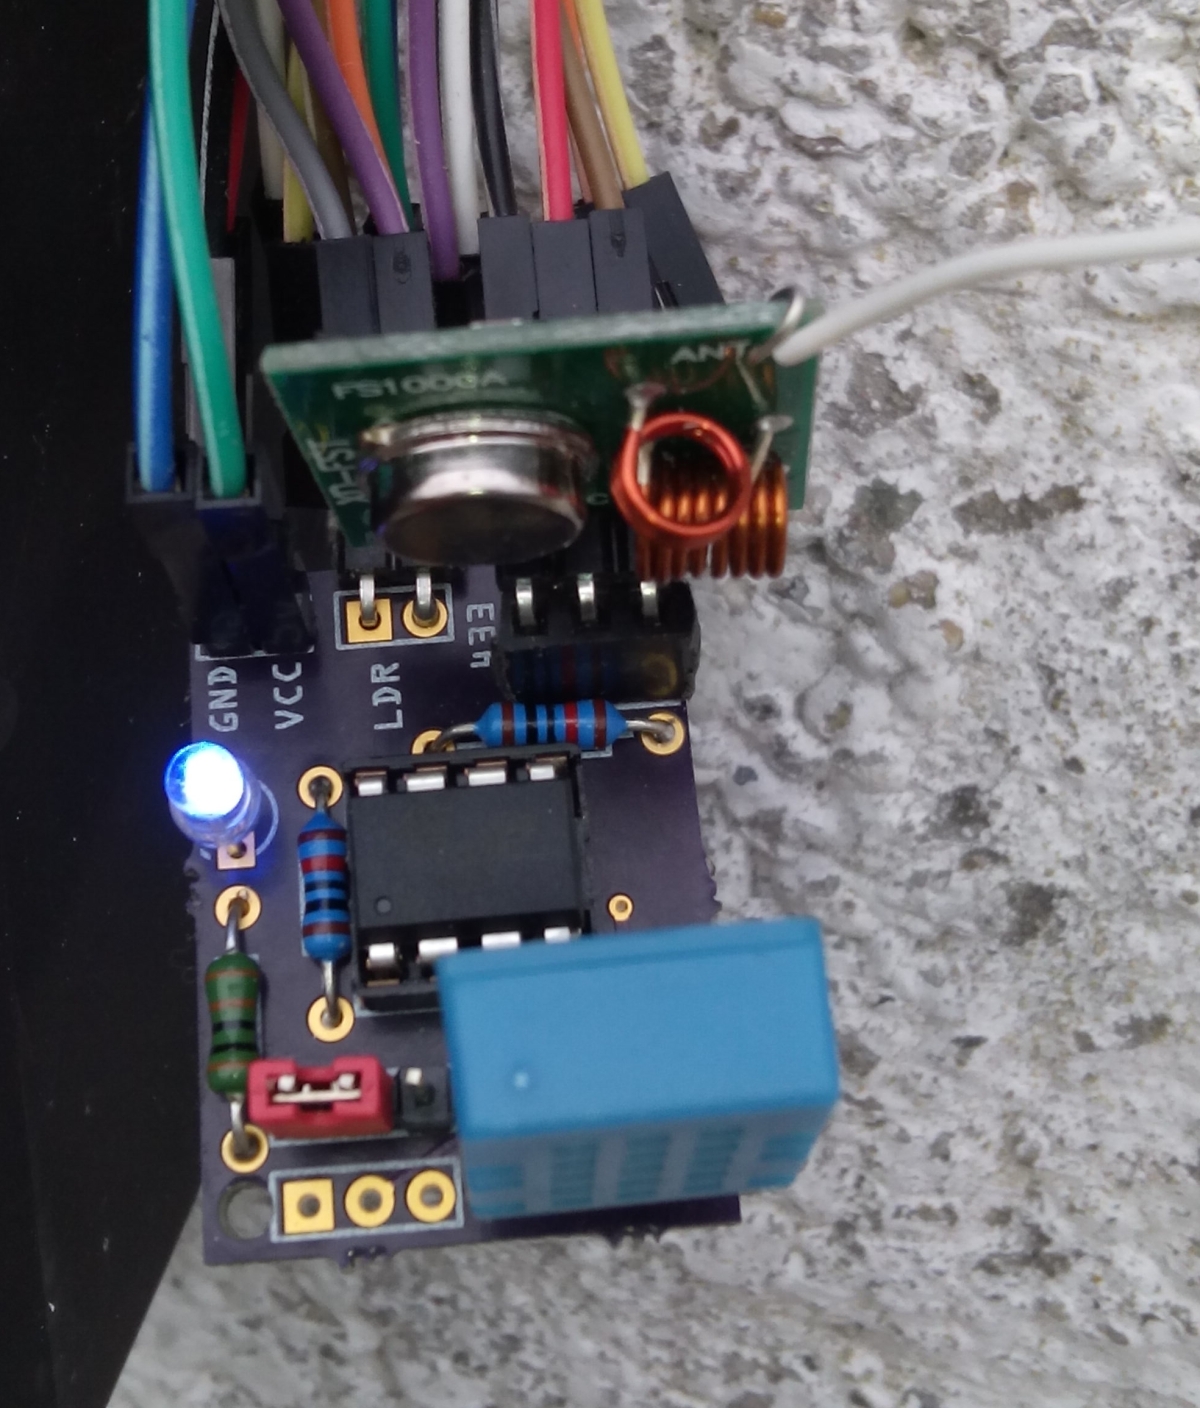 Sending sensor data wireless (433MHz) with an Attiny85 or Attiny45 with Manchestercode